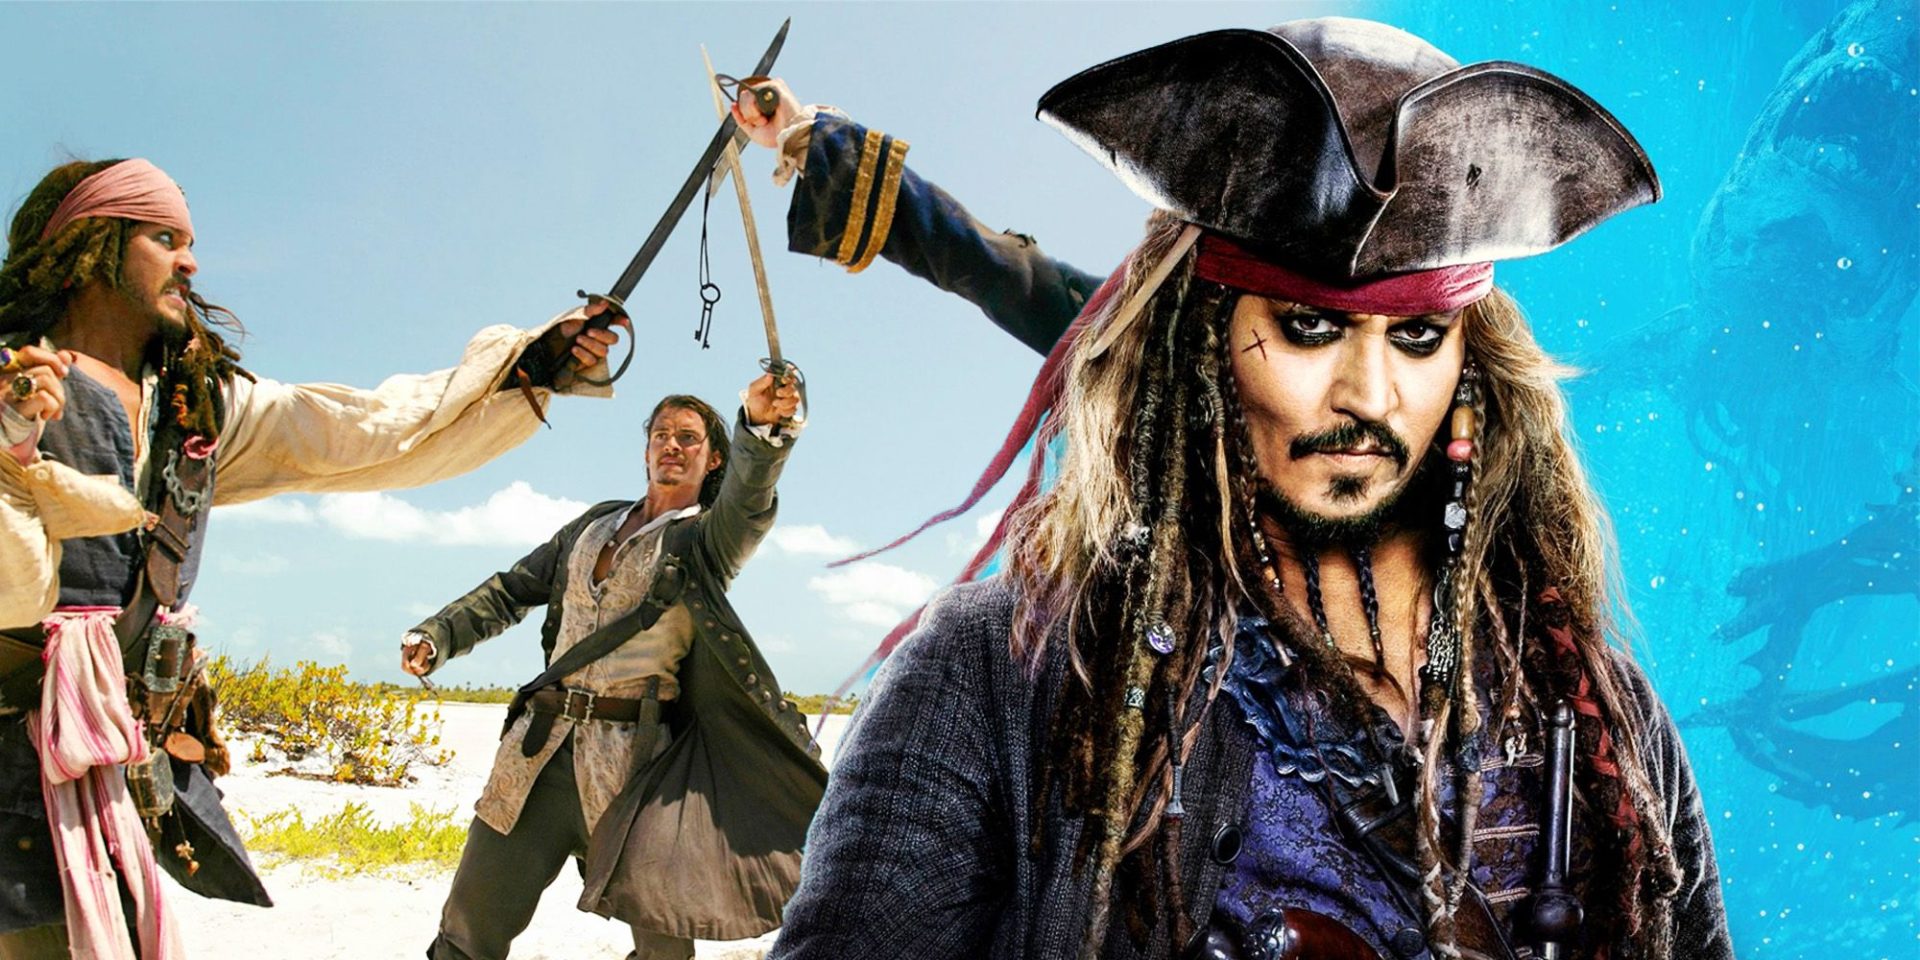 Details of Pirates of the Caribbean piracy impress historian